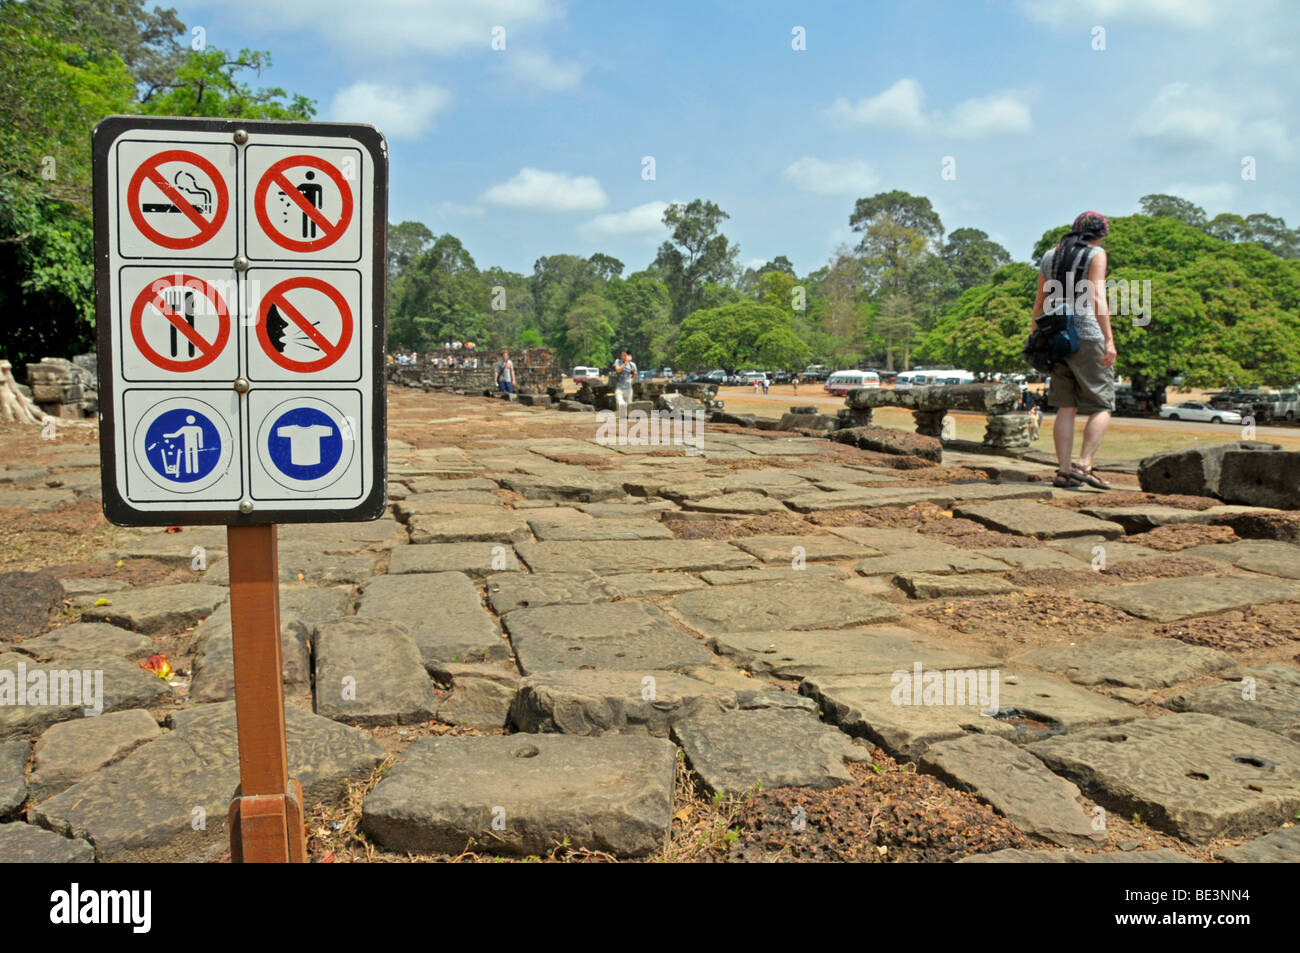 Signs, prohibitions and regulations, Terrace of the Elephants, Angkor, Cambodia, Asia Stock Photo